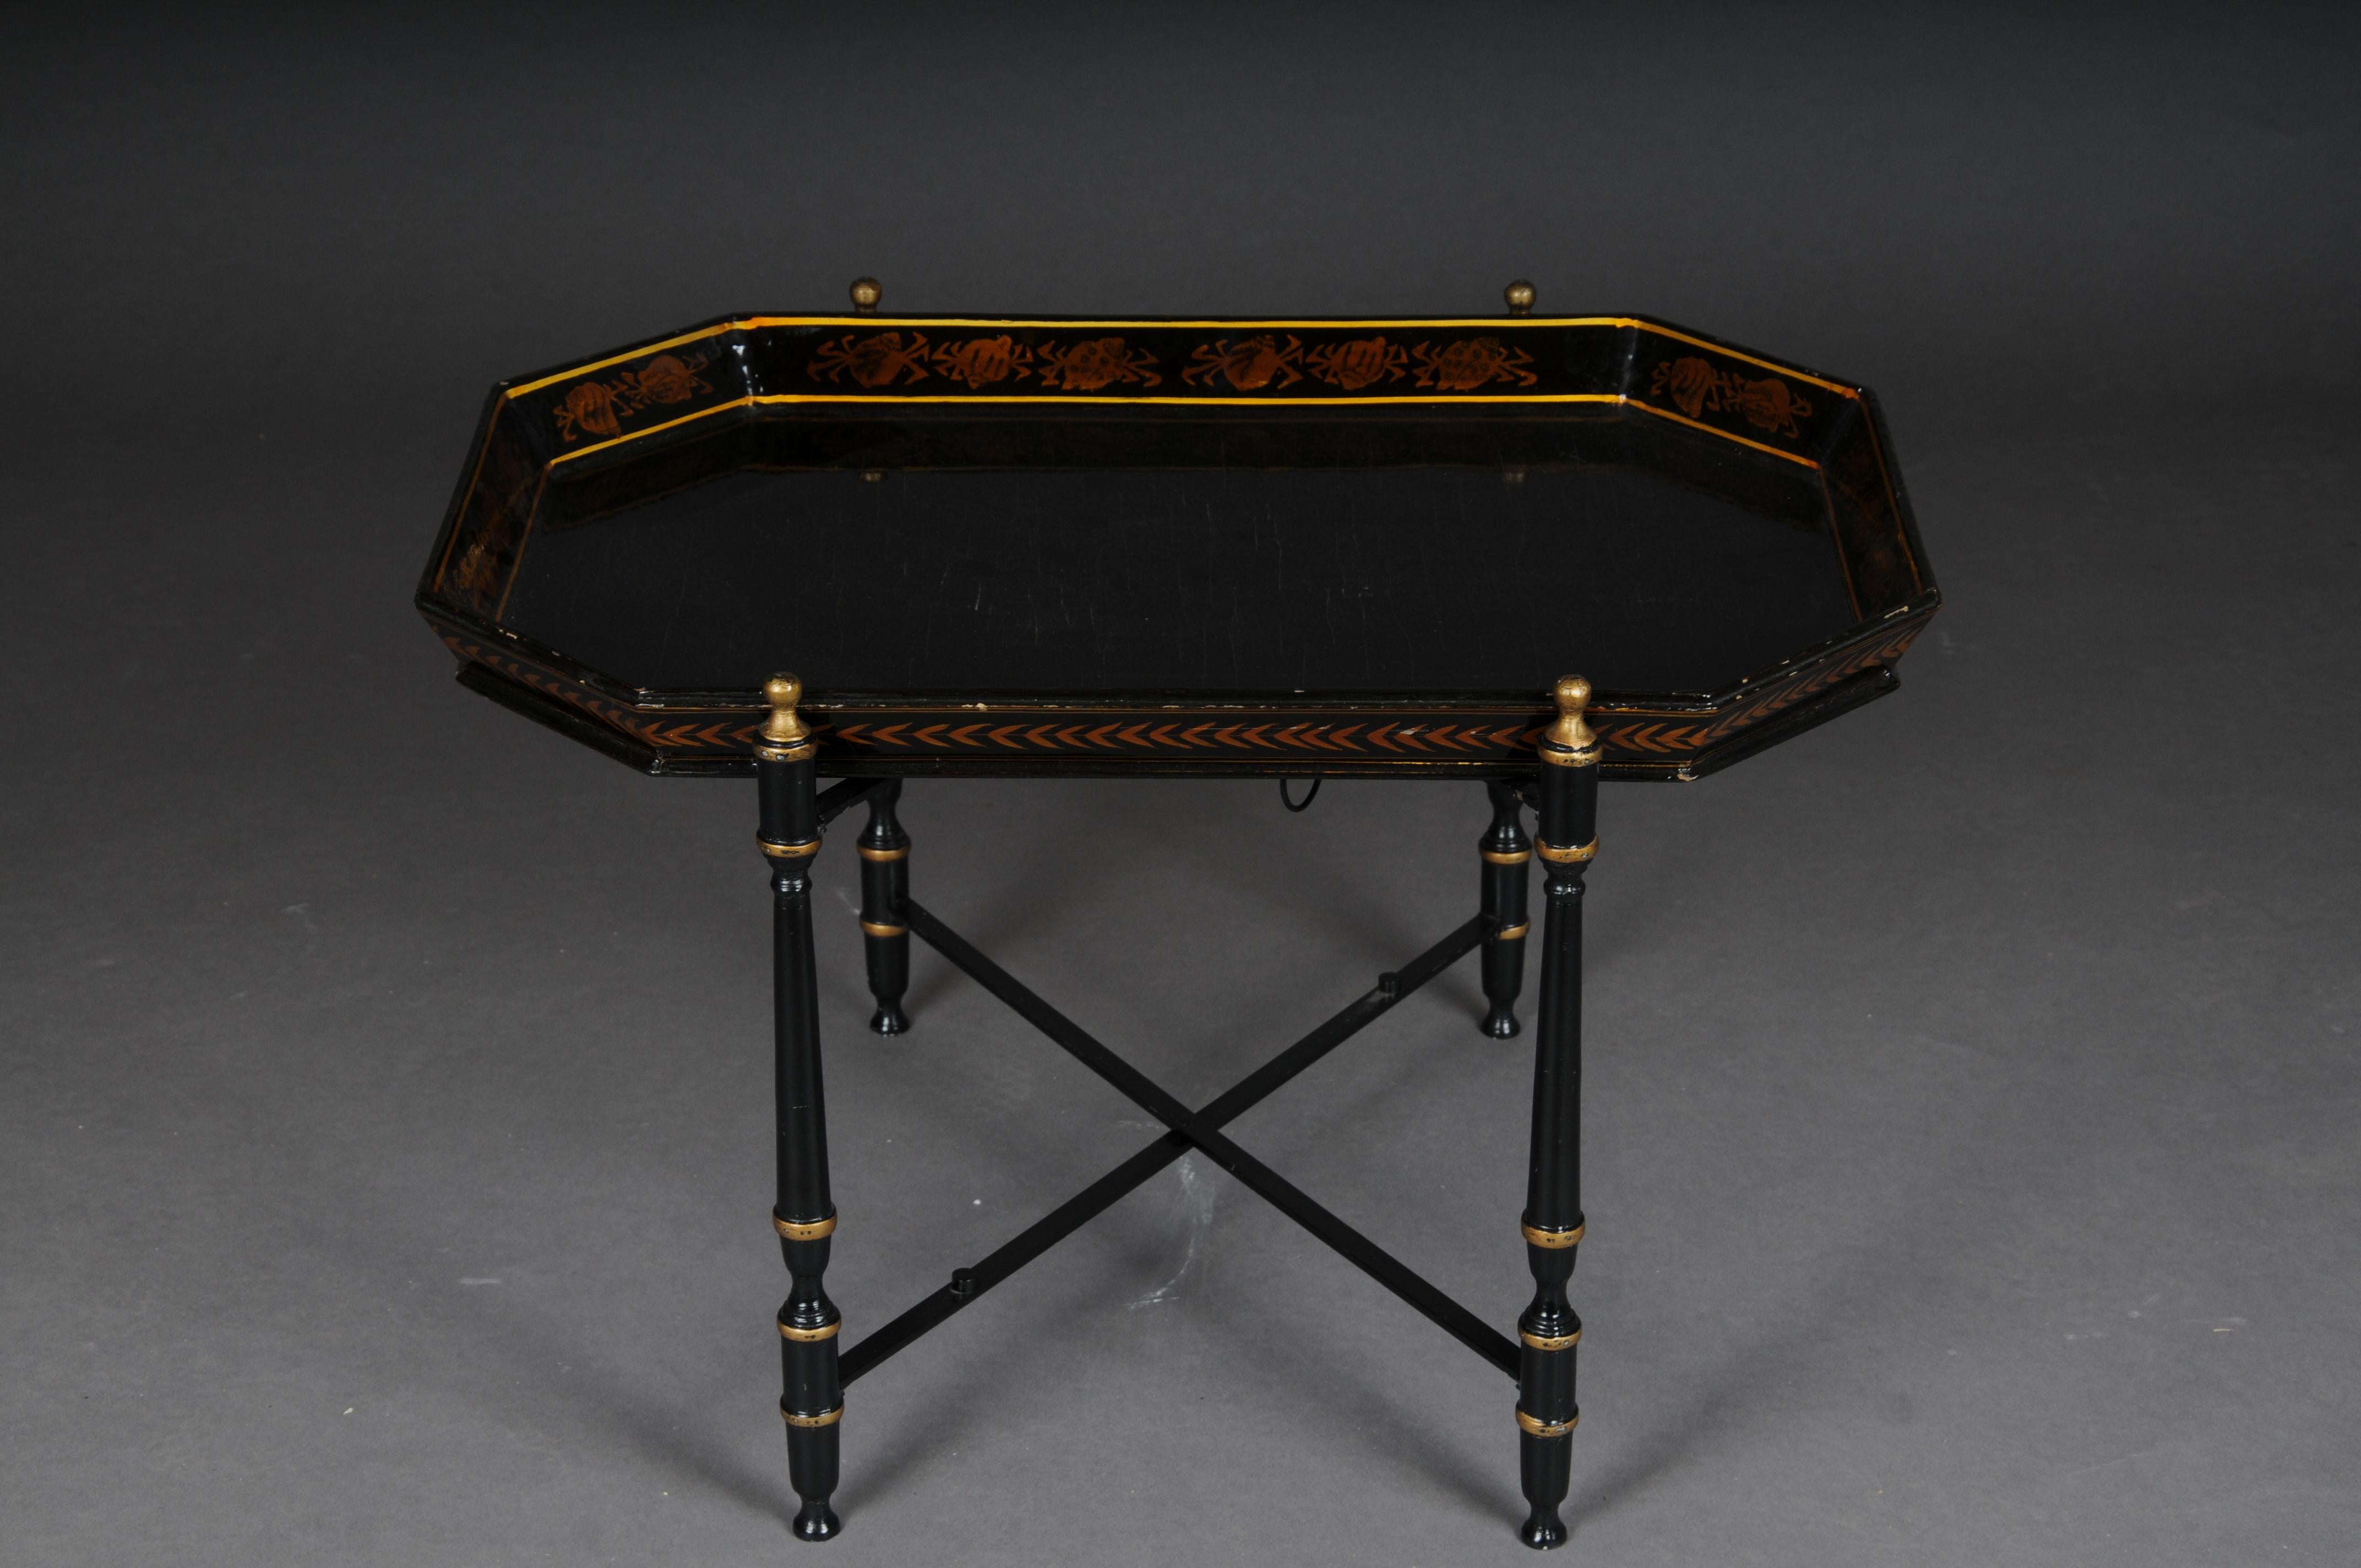 20th Century Beautiful black Pompeian style tray table

Completely painted black with brown trim. X-shaped frame in black lacquered metal, removable wooden tray. Probably Italy, 20th Century in Pompeian style